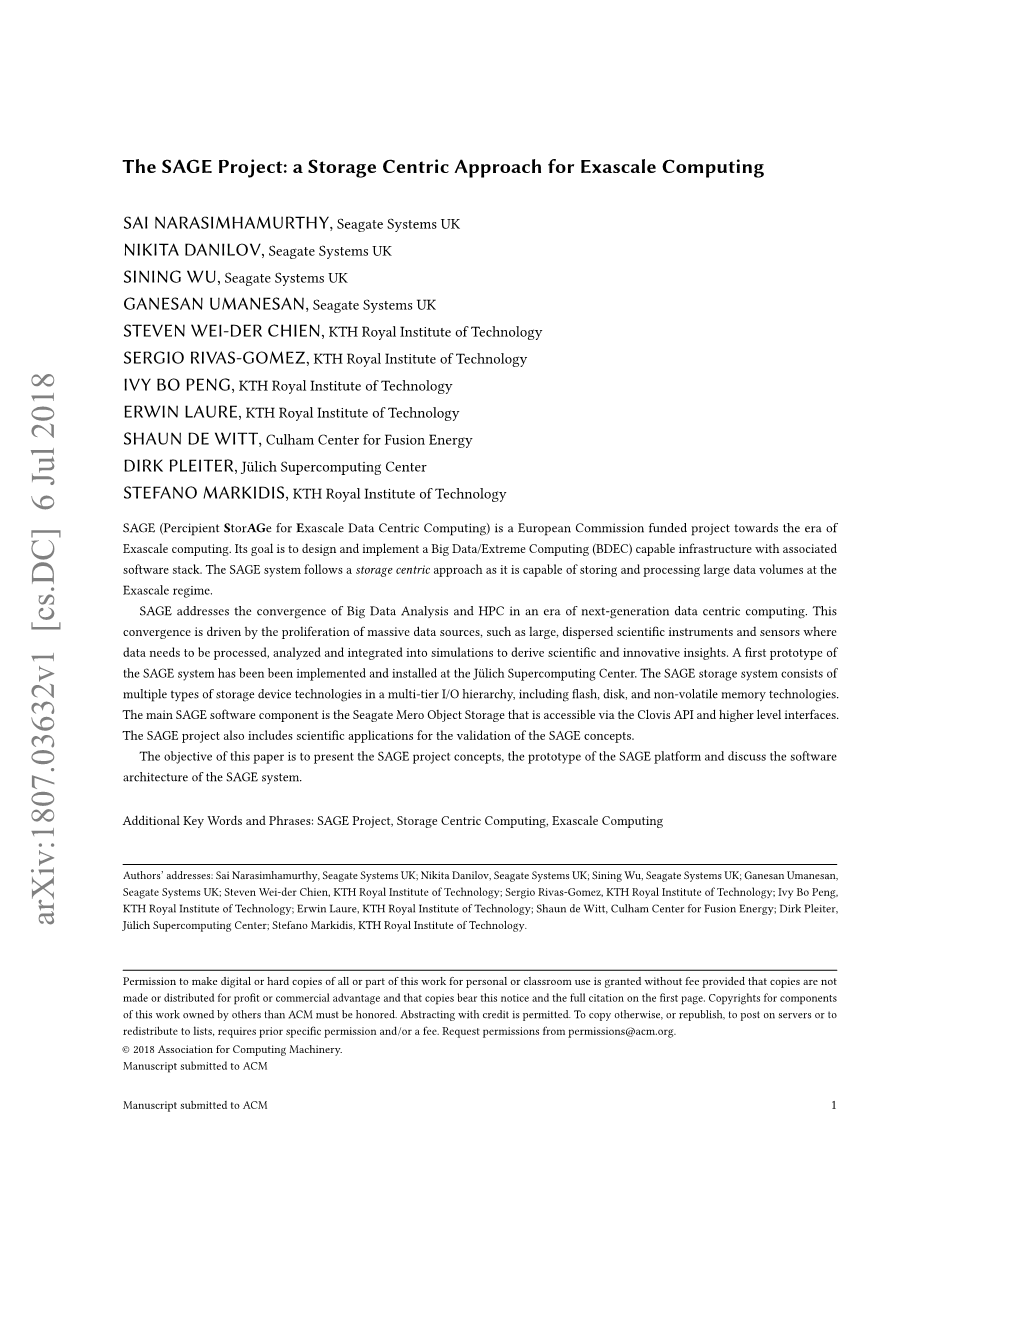 The SAGE Project: a Storage Centric Approach for Exascale Computing